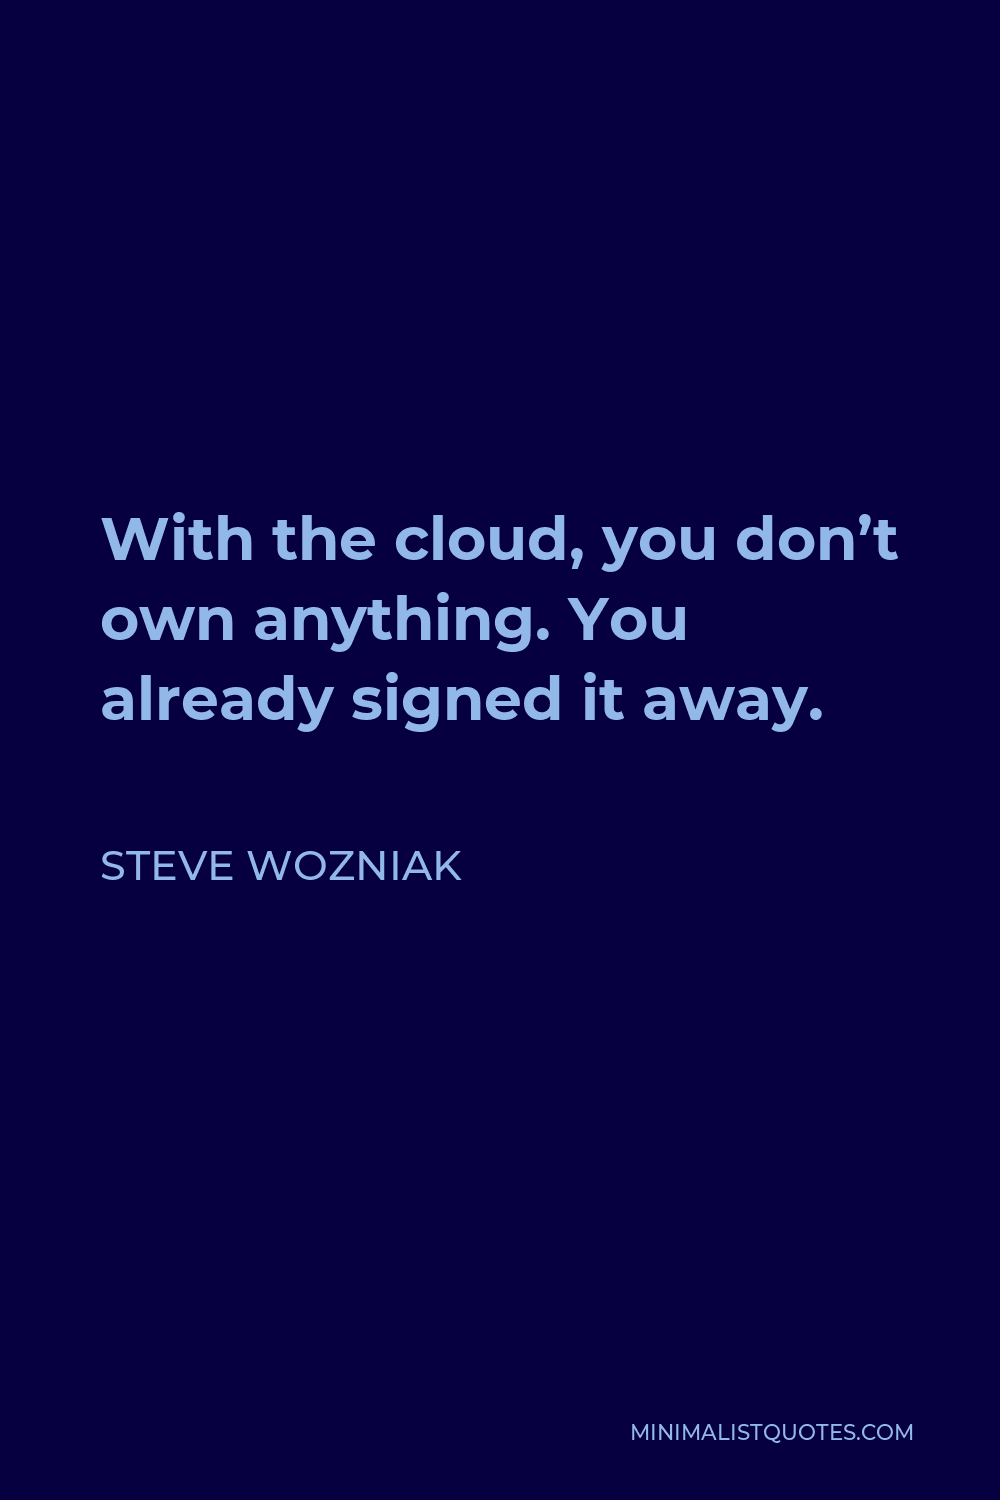 Steve Wozniak Quote - With the cloud, you don’t own anything. You already signed it away.